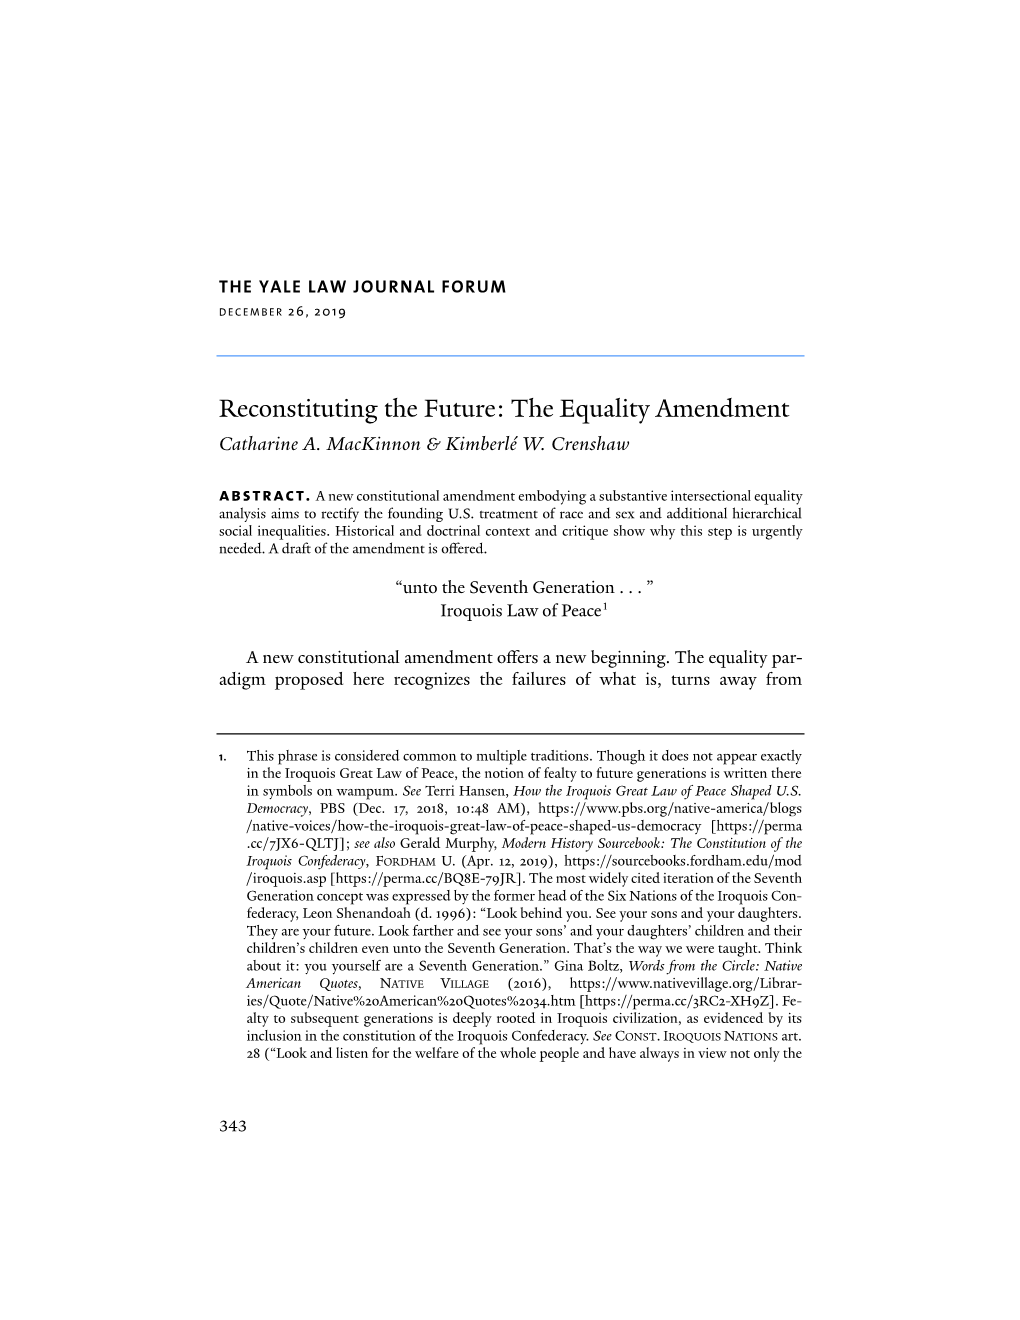 Reconstituting the Future: the Equality Amendment Catharine A